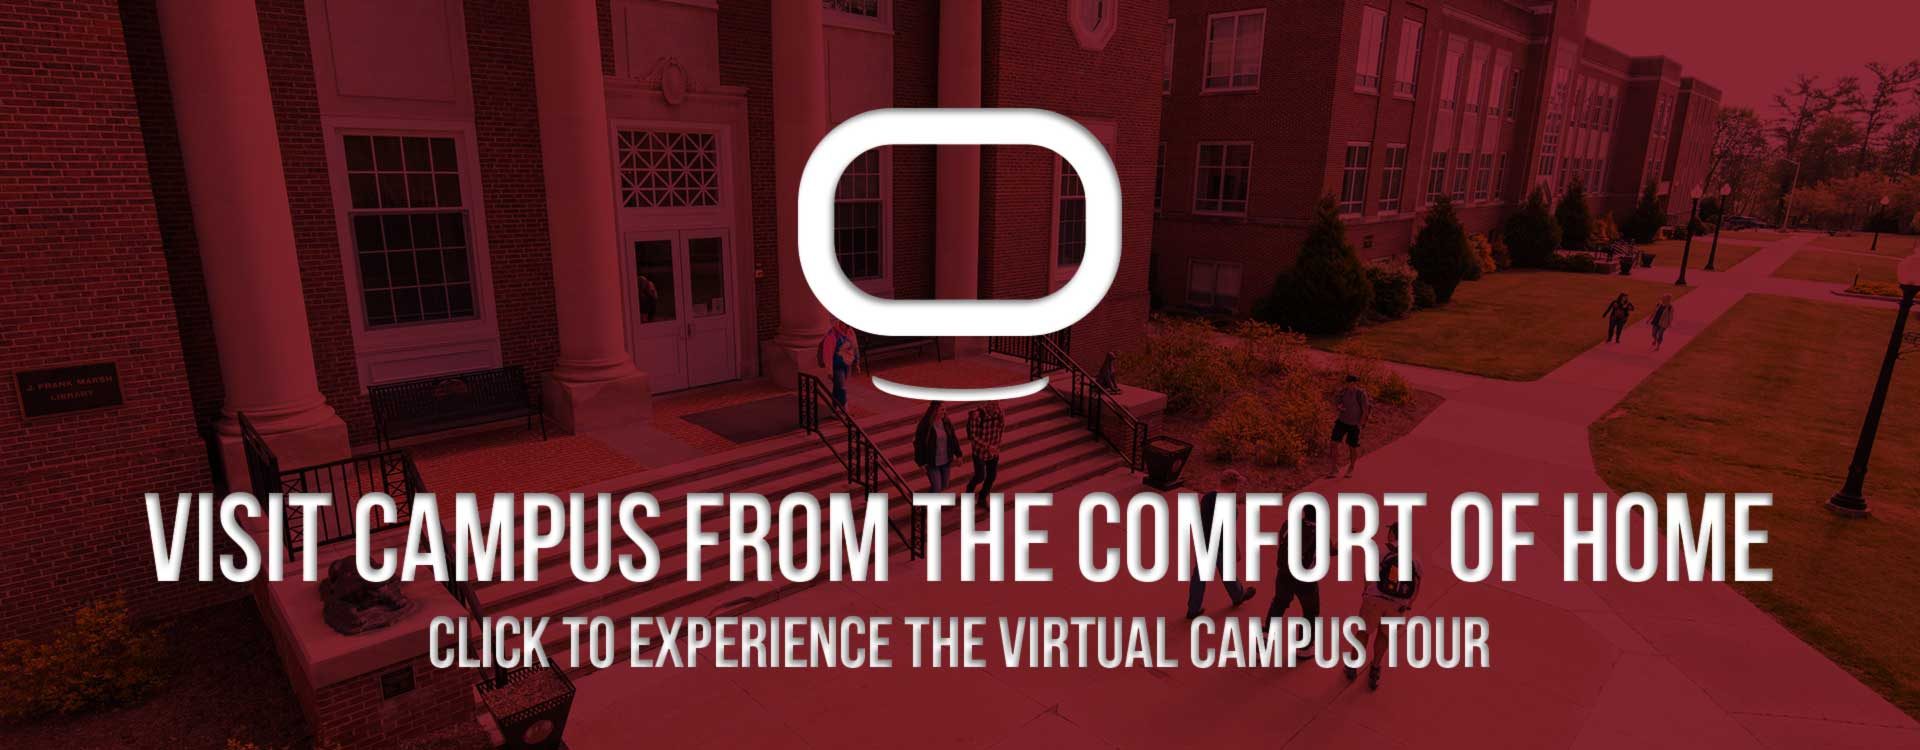 Visit campus from the comfort of home! Click here to experience our virtual campus tour